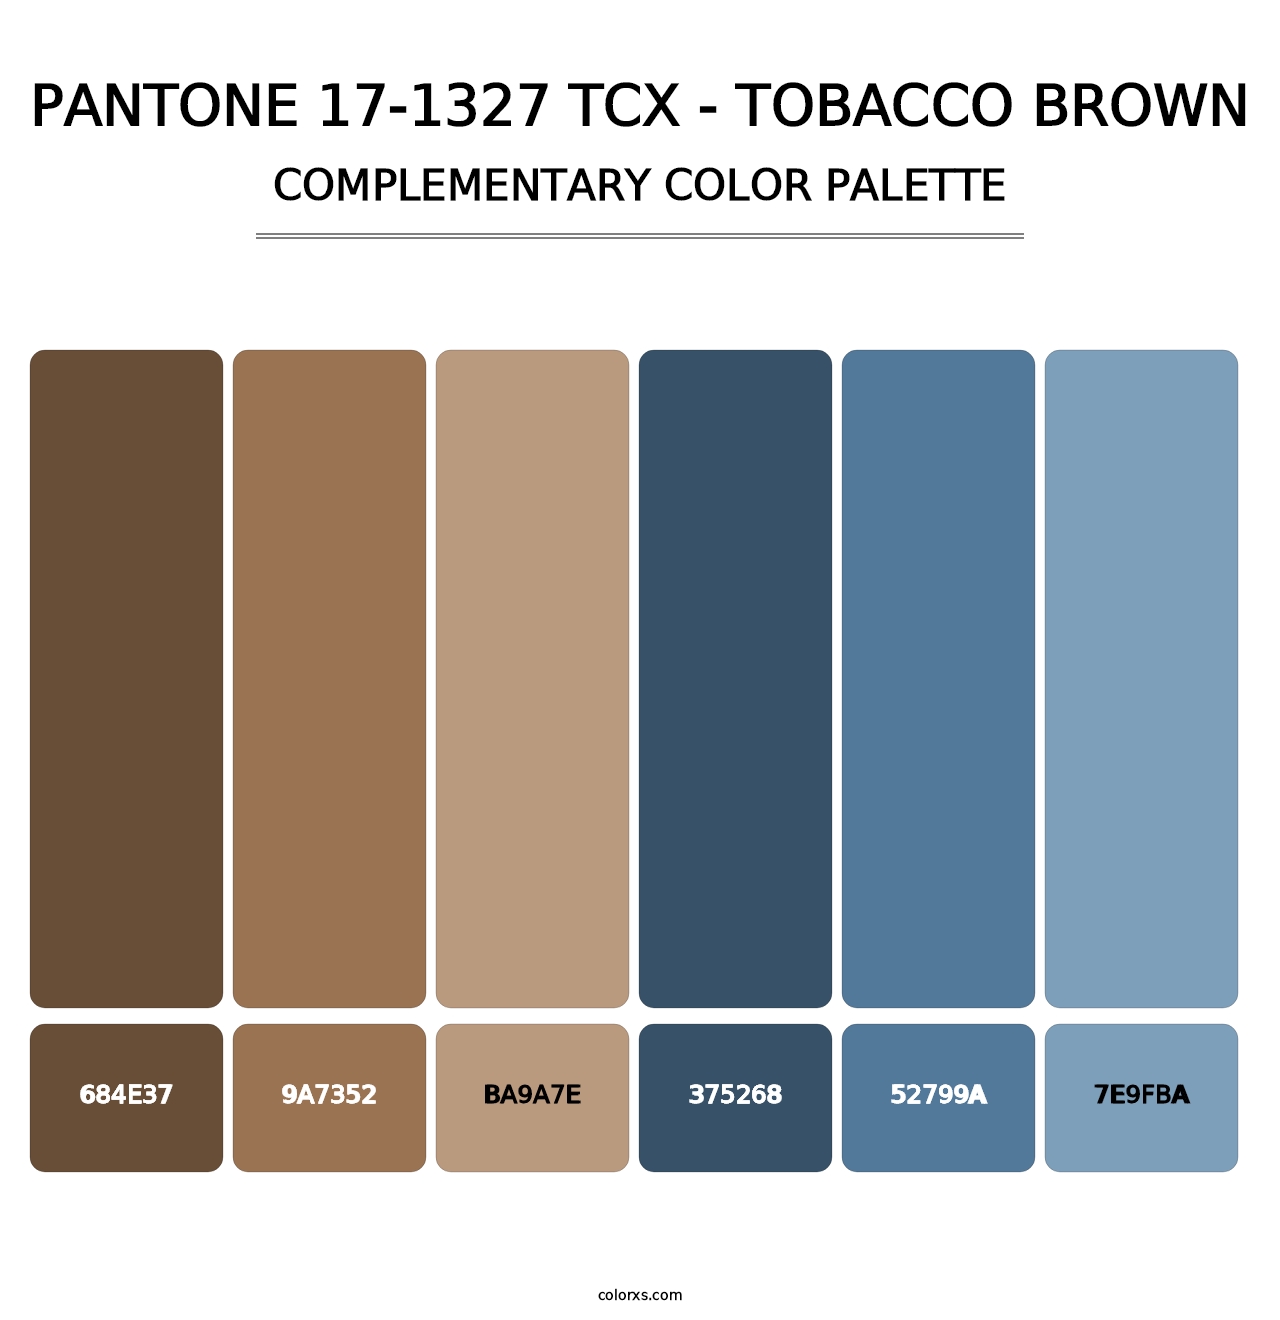 PANTONE 17-1327 TCX - Tobacco Brown - Complementary Color Palette